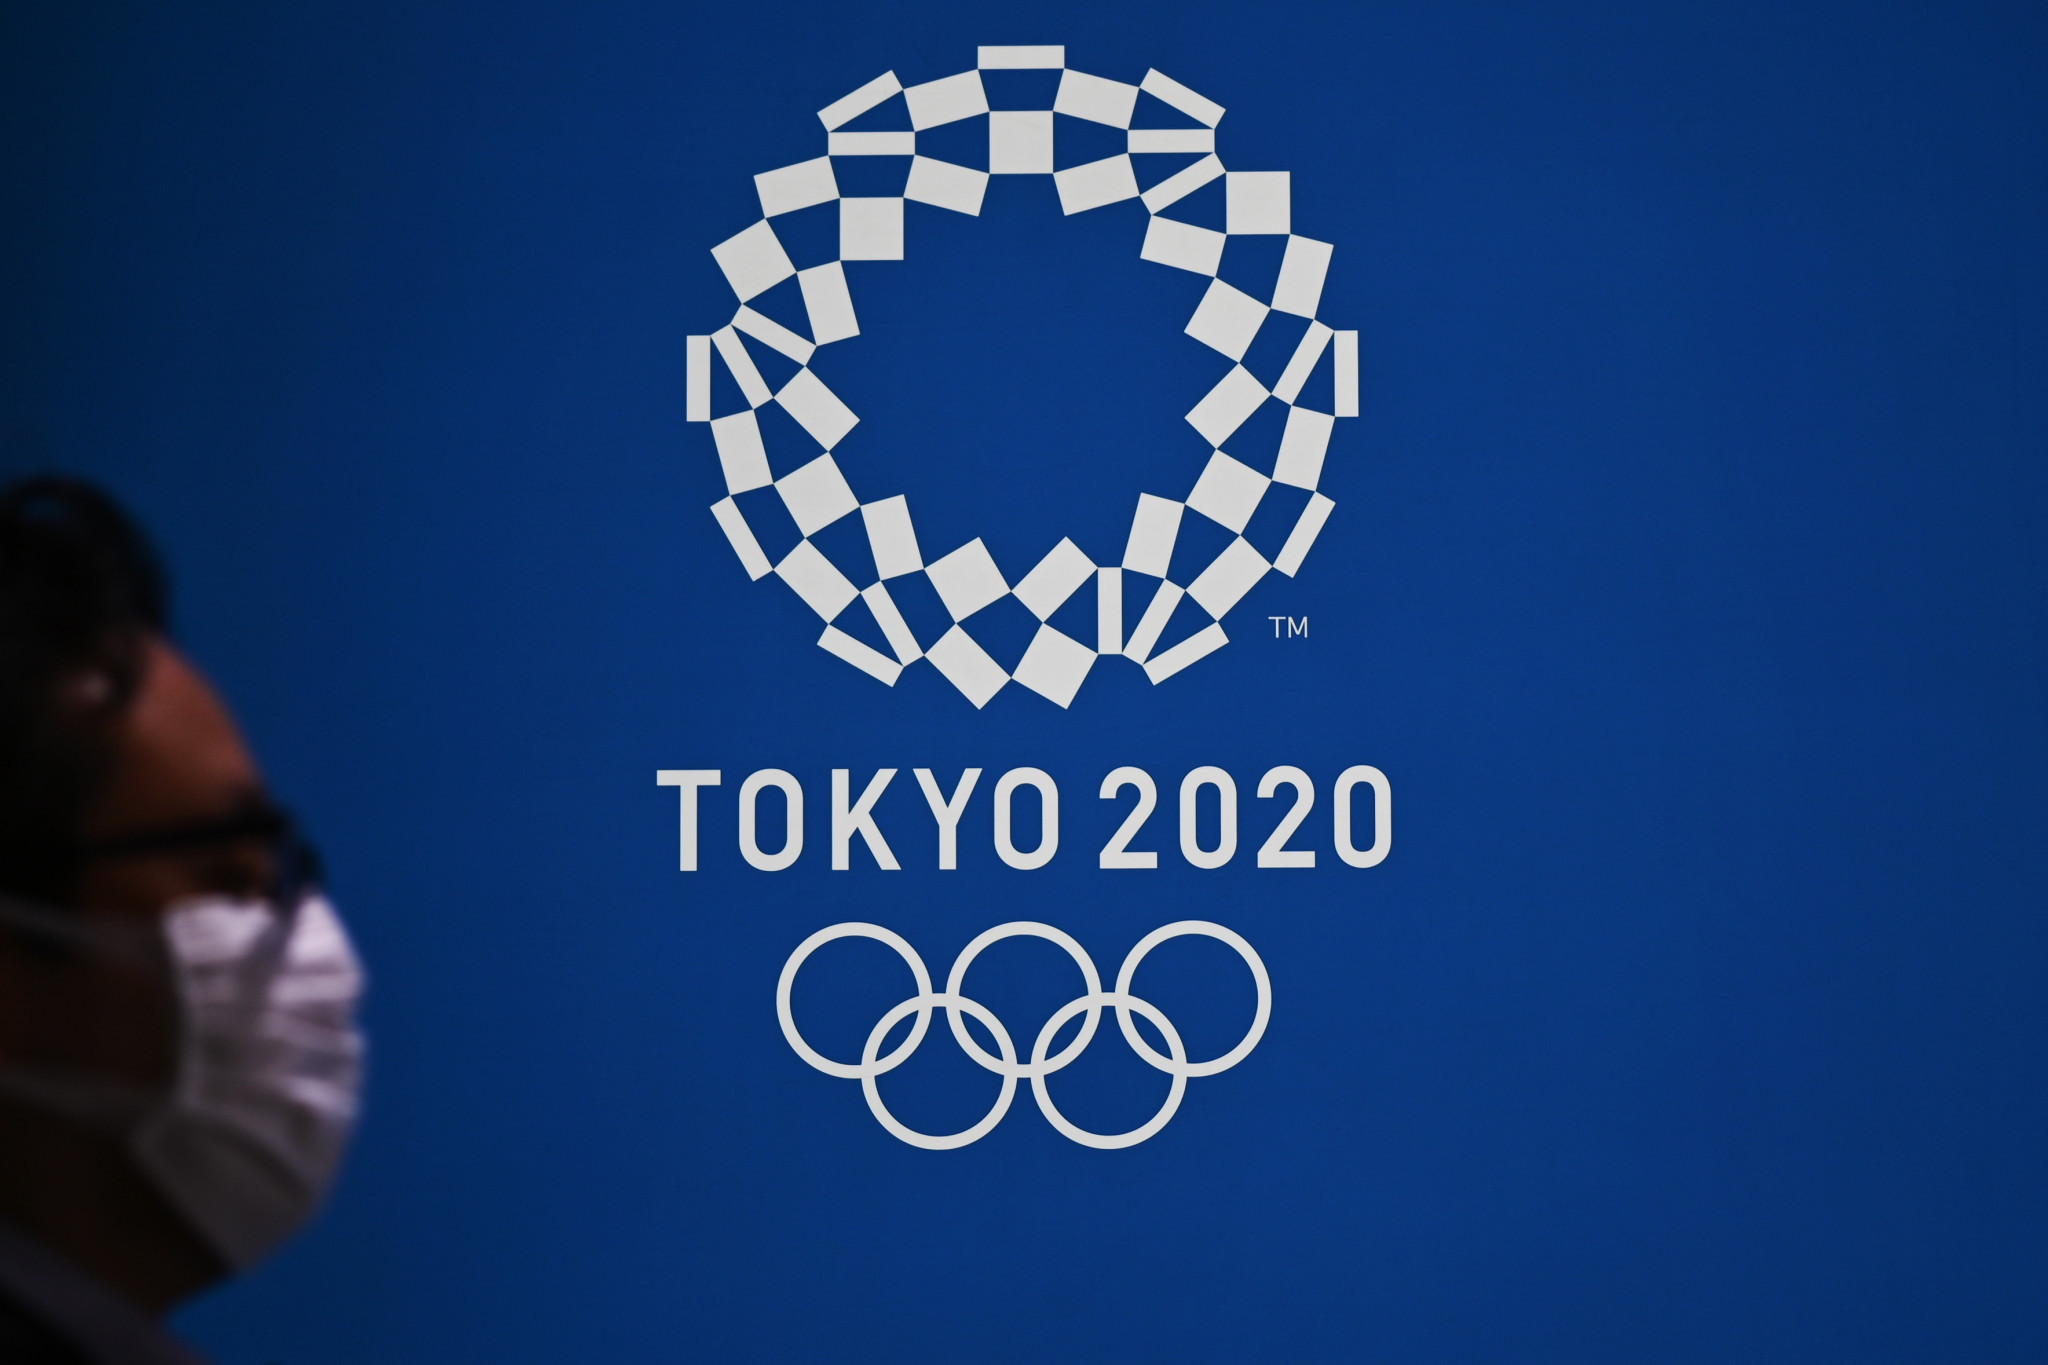 Tokyo 2020 was postponed by a year as a result of the coronavirus pandemic, which brought the sporting world to almost a complete halt ©Getty Images